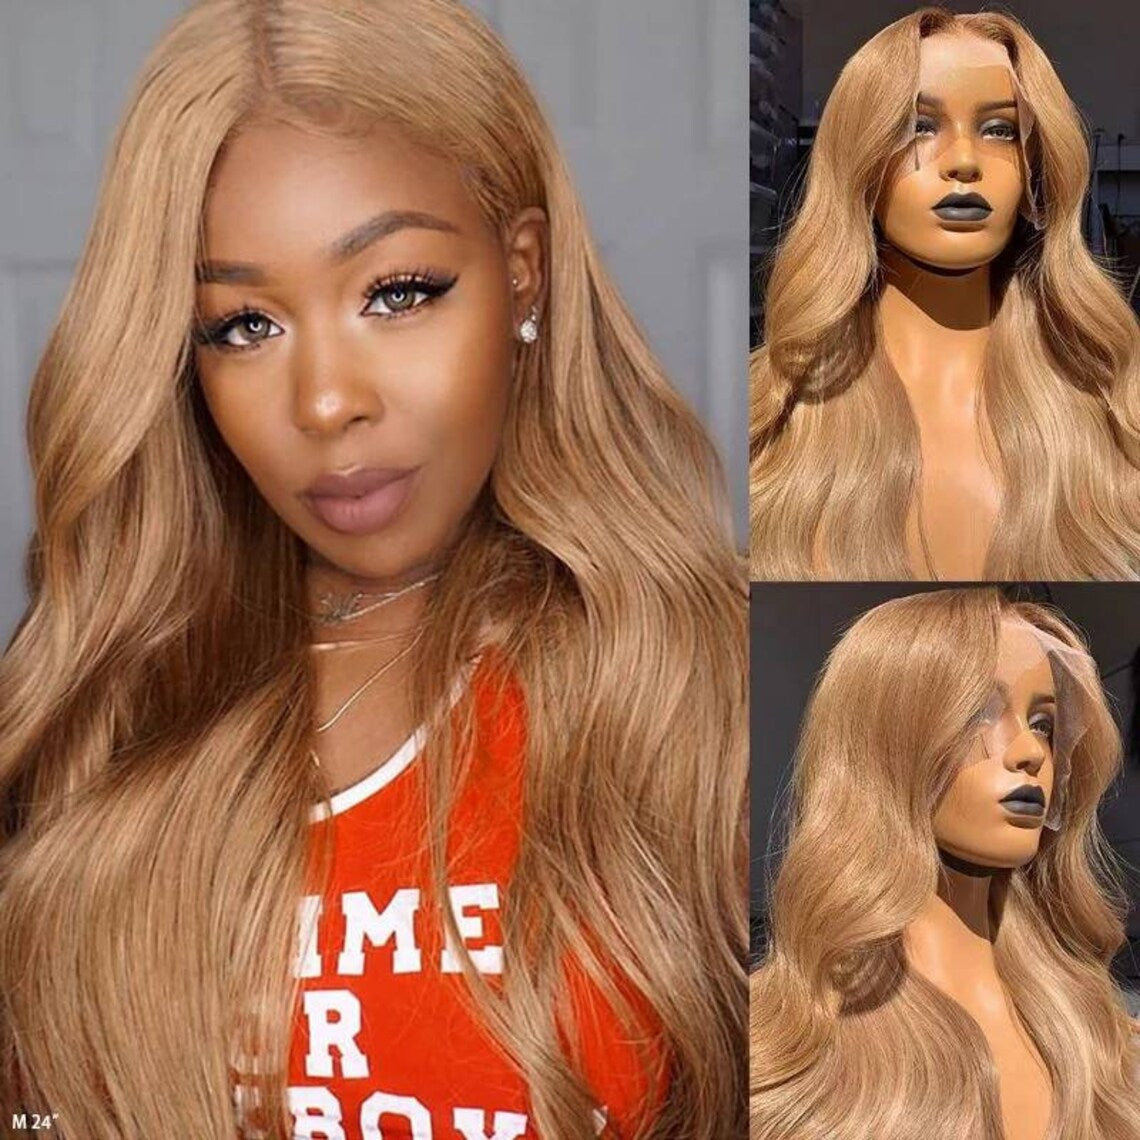 OneMore Honey Blonde Body Wave Wig 13x4 Lace Front Wig Glueless Wigs for Women